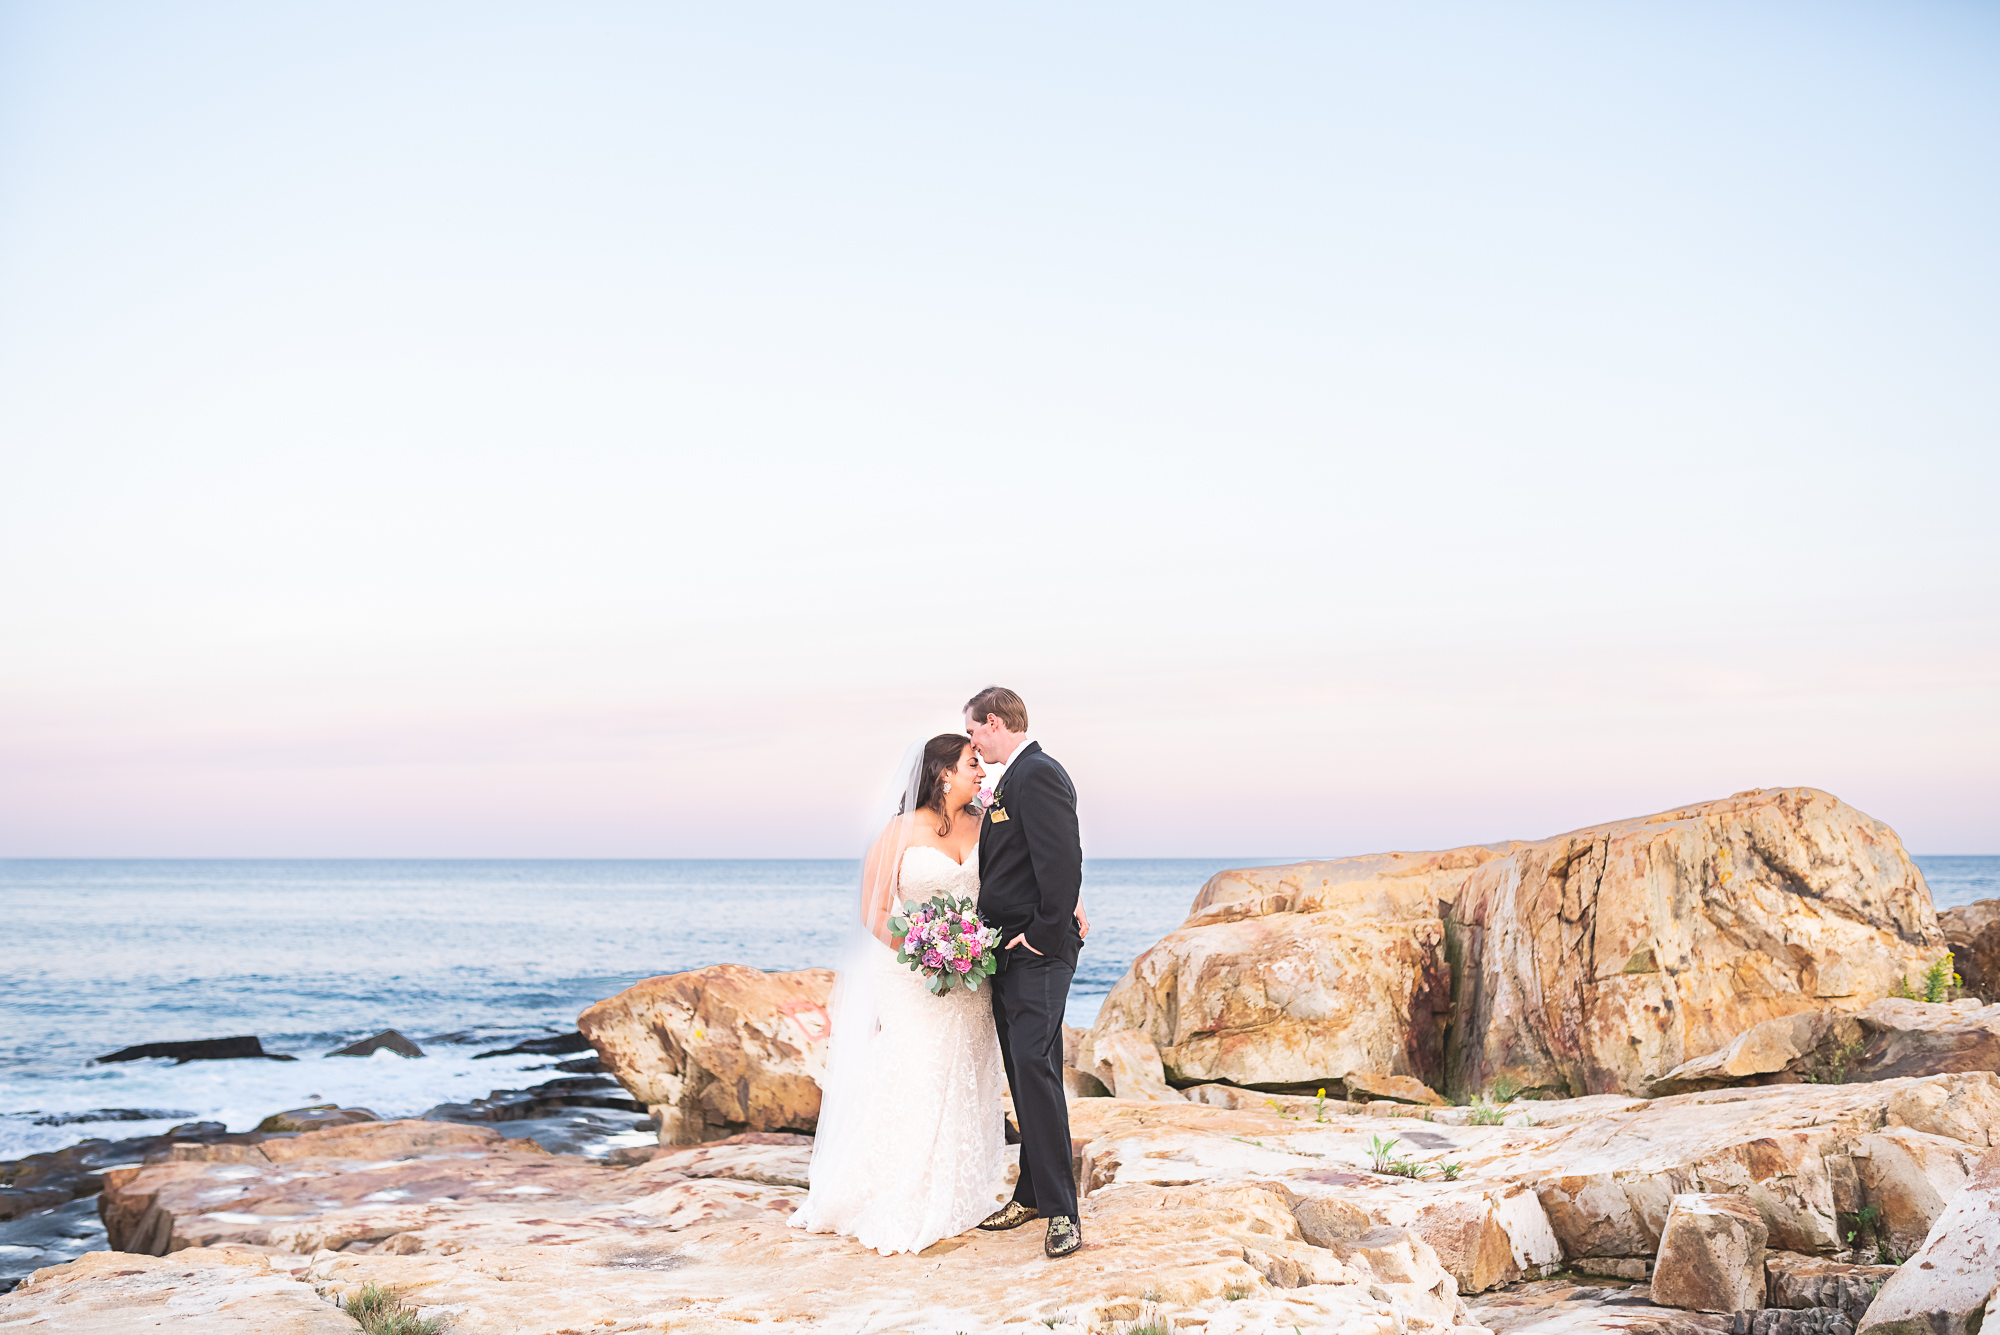 Wedding portraits in Bristol Rhode Island. Husband and wife standing on rocks by the ocean at sunset.